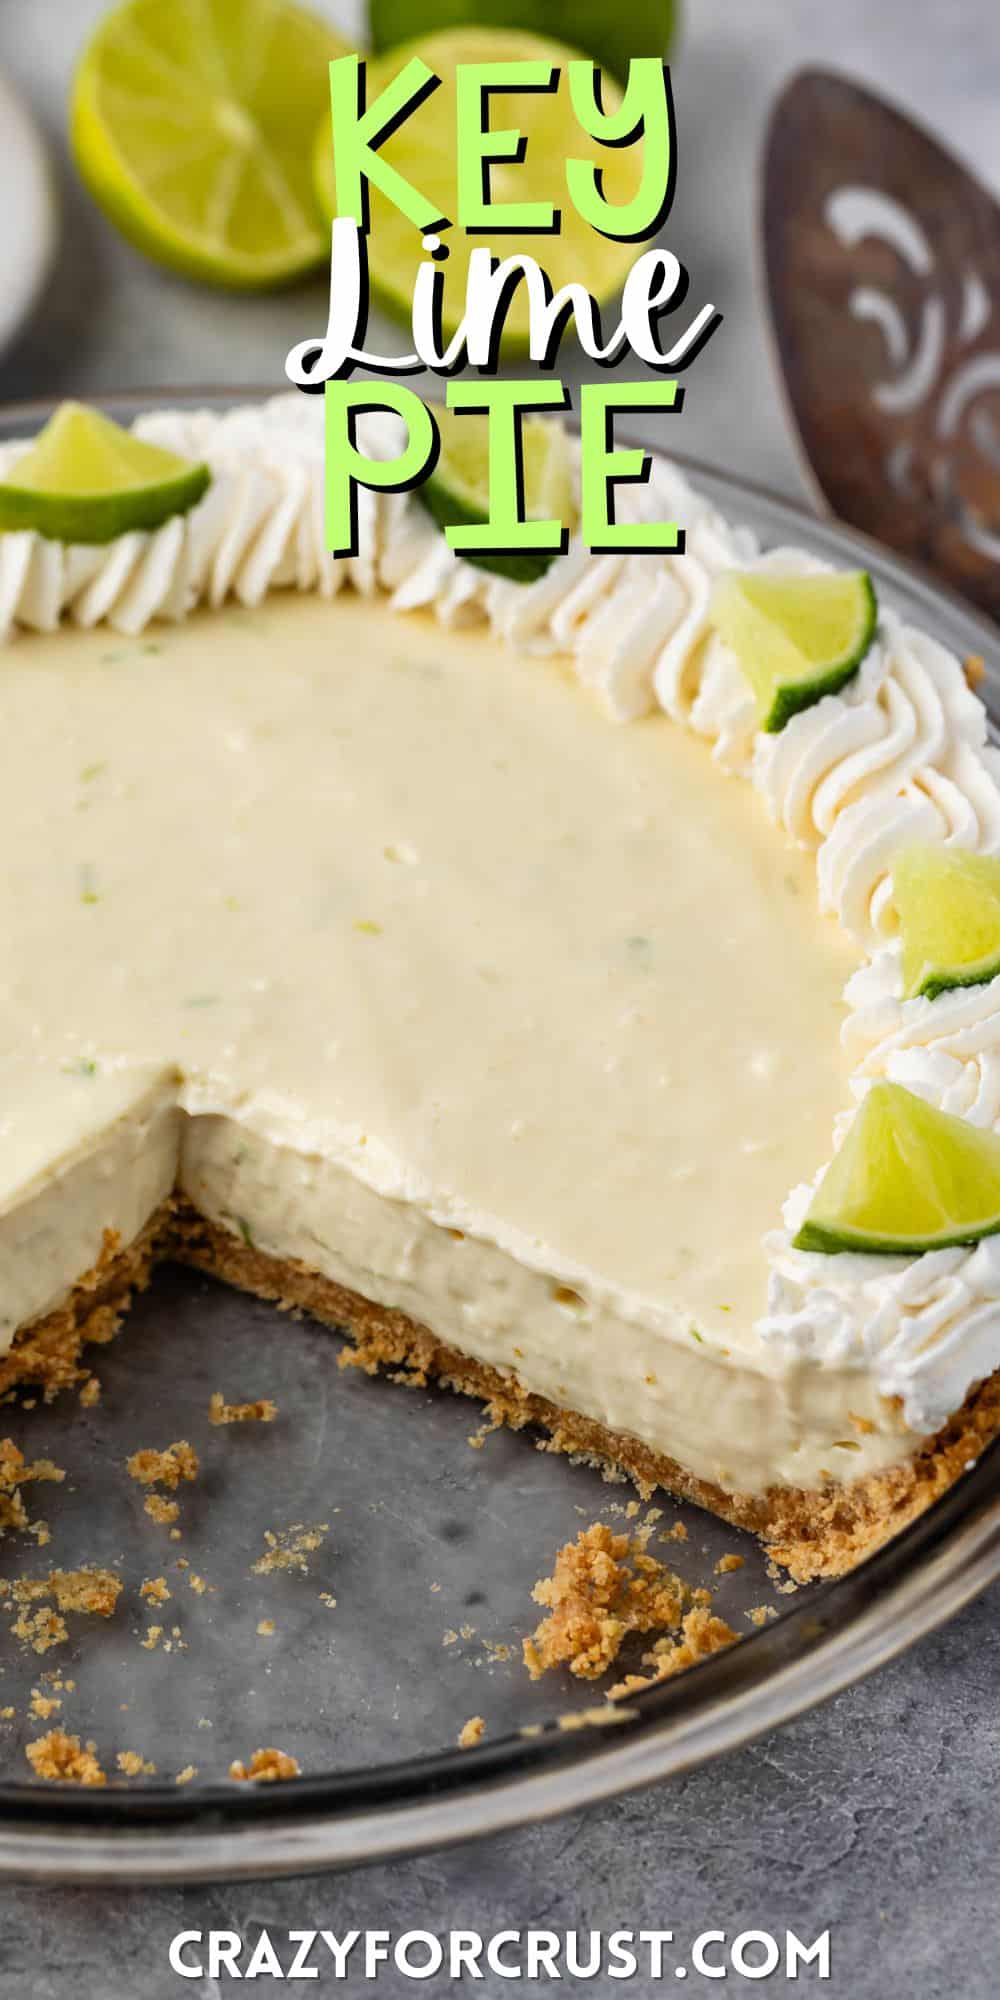 key lime pie with whipped cream and sliced limes on top with words on the image.